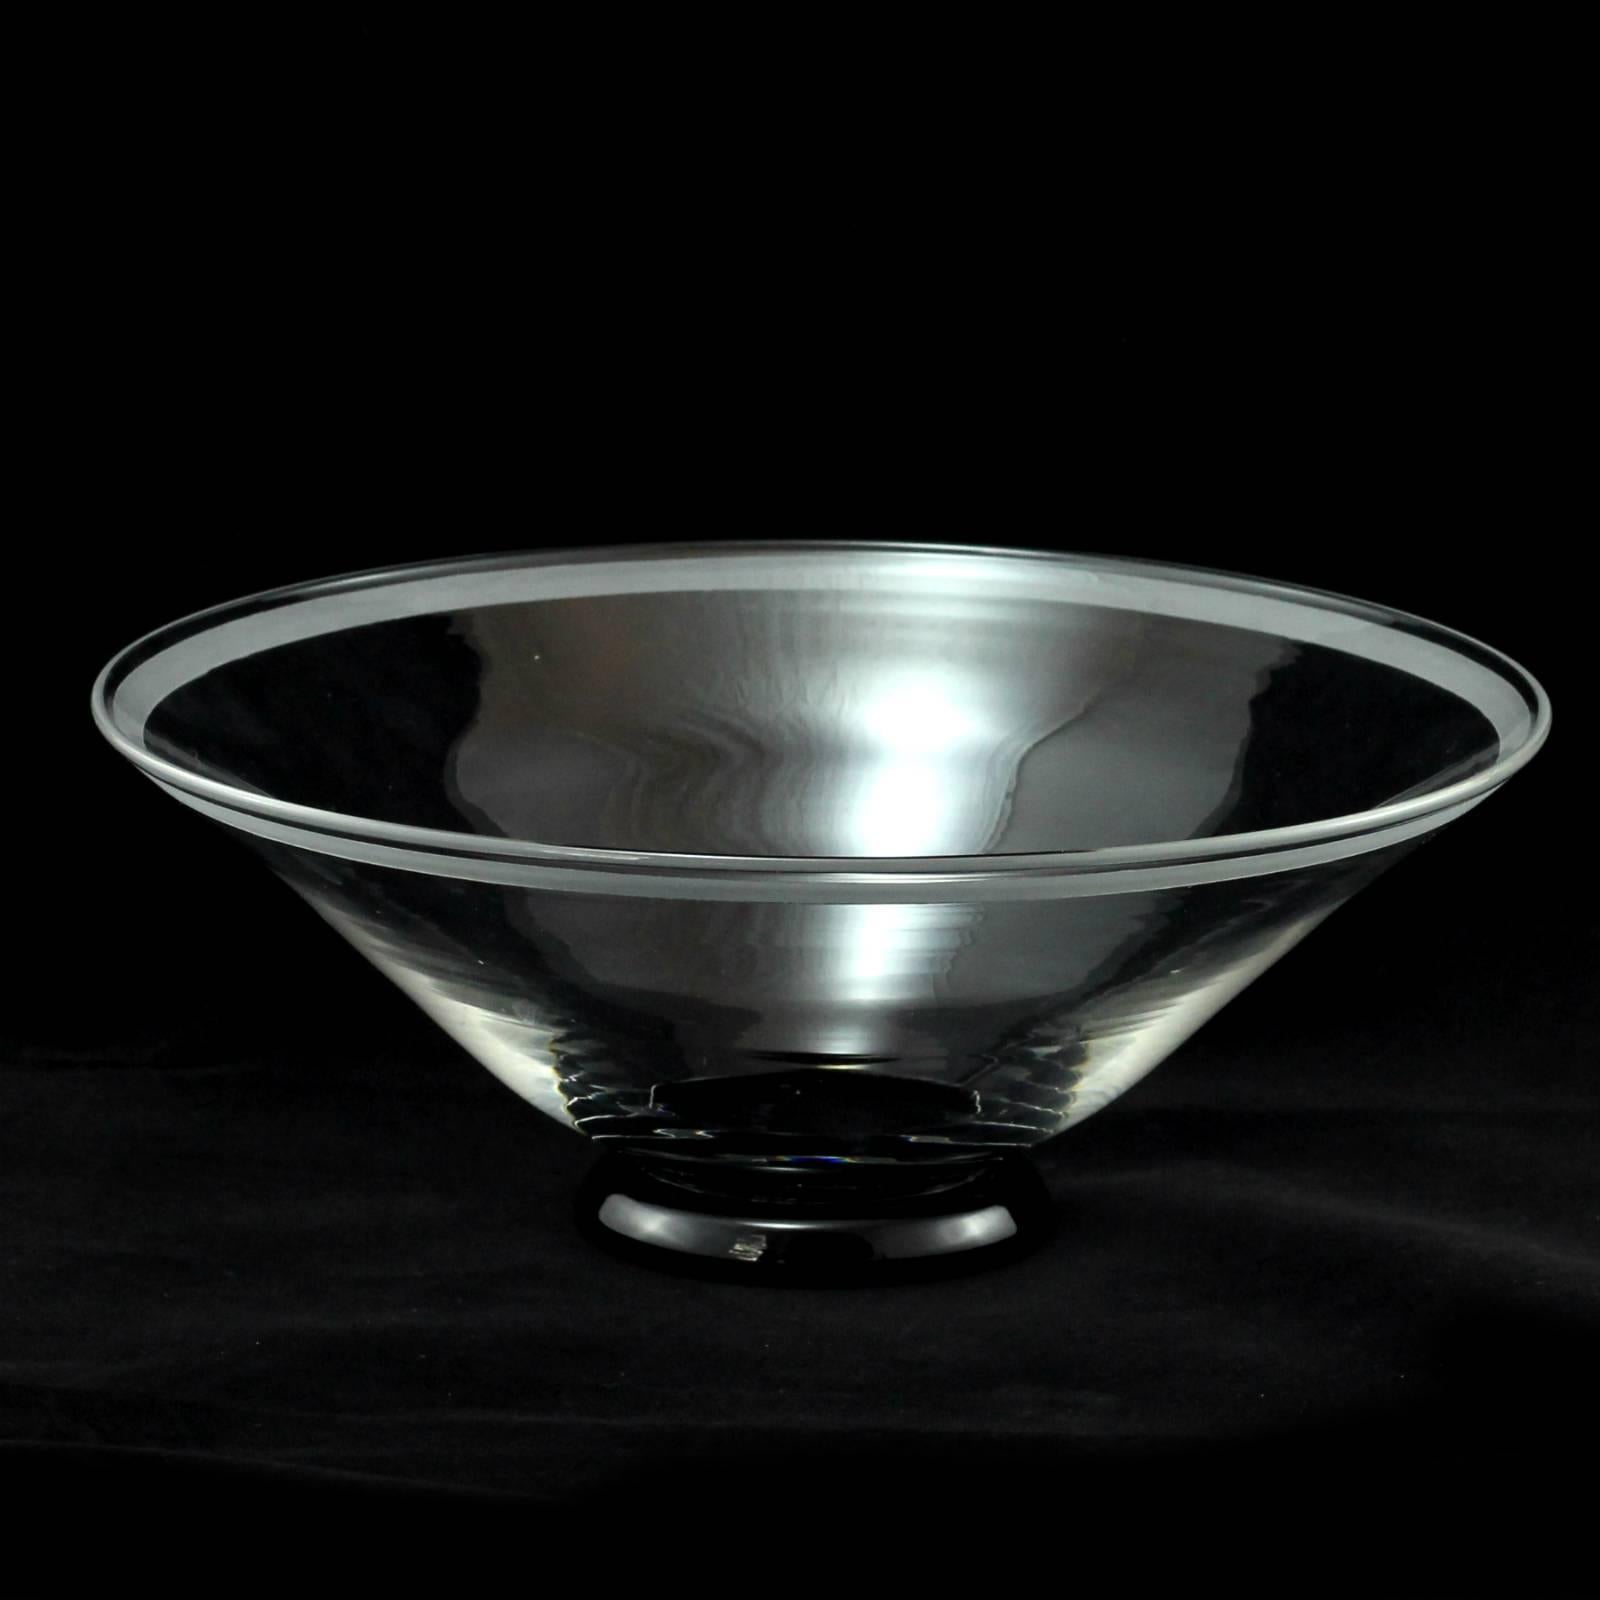 A rare signed art deco glass bowl, with frost edge and black foot by designer Keith Murray.